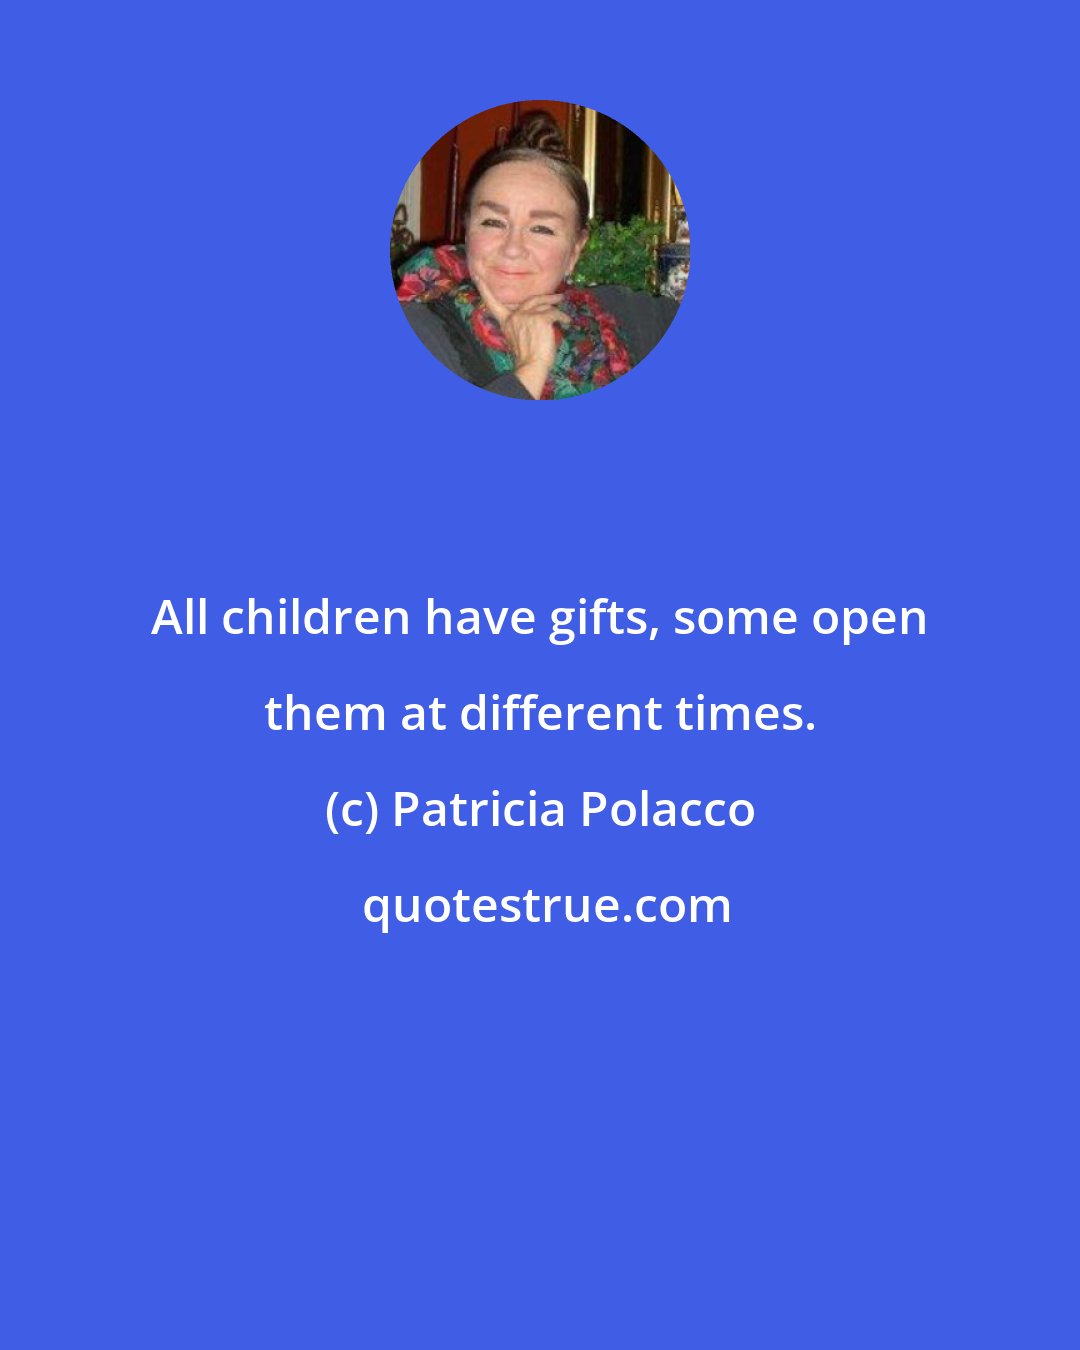 Patricia Polacco: All children have gifts, some open them at different times.